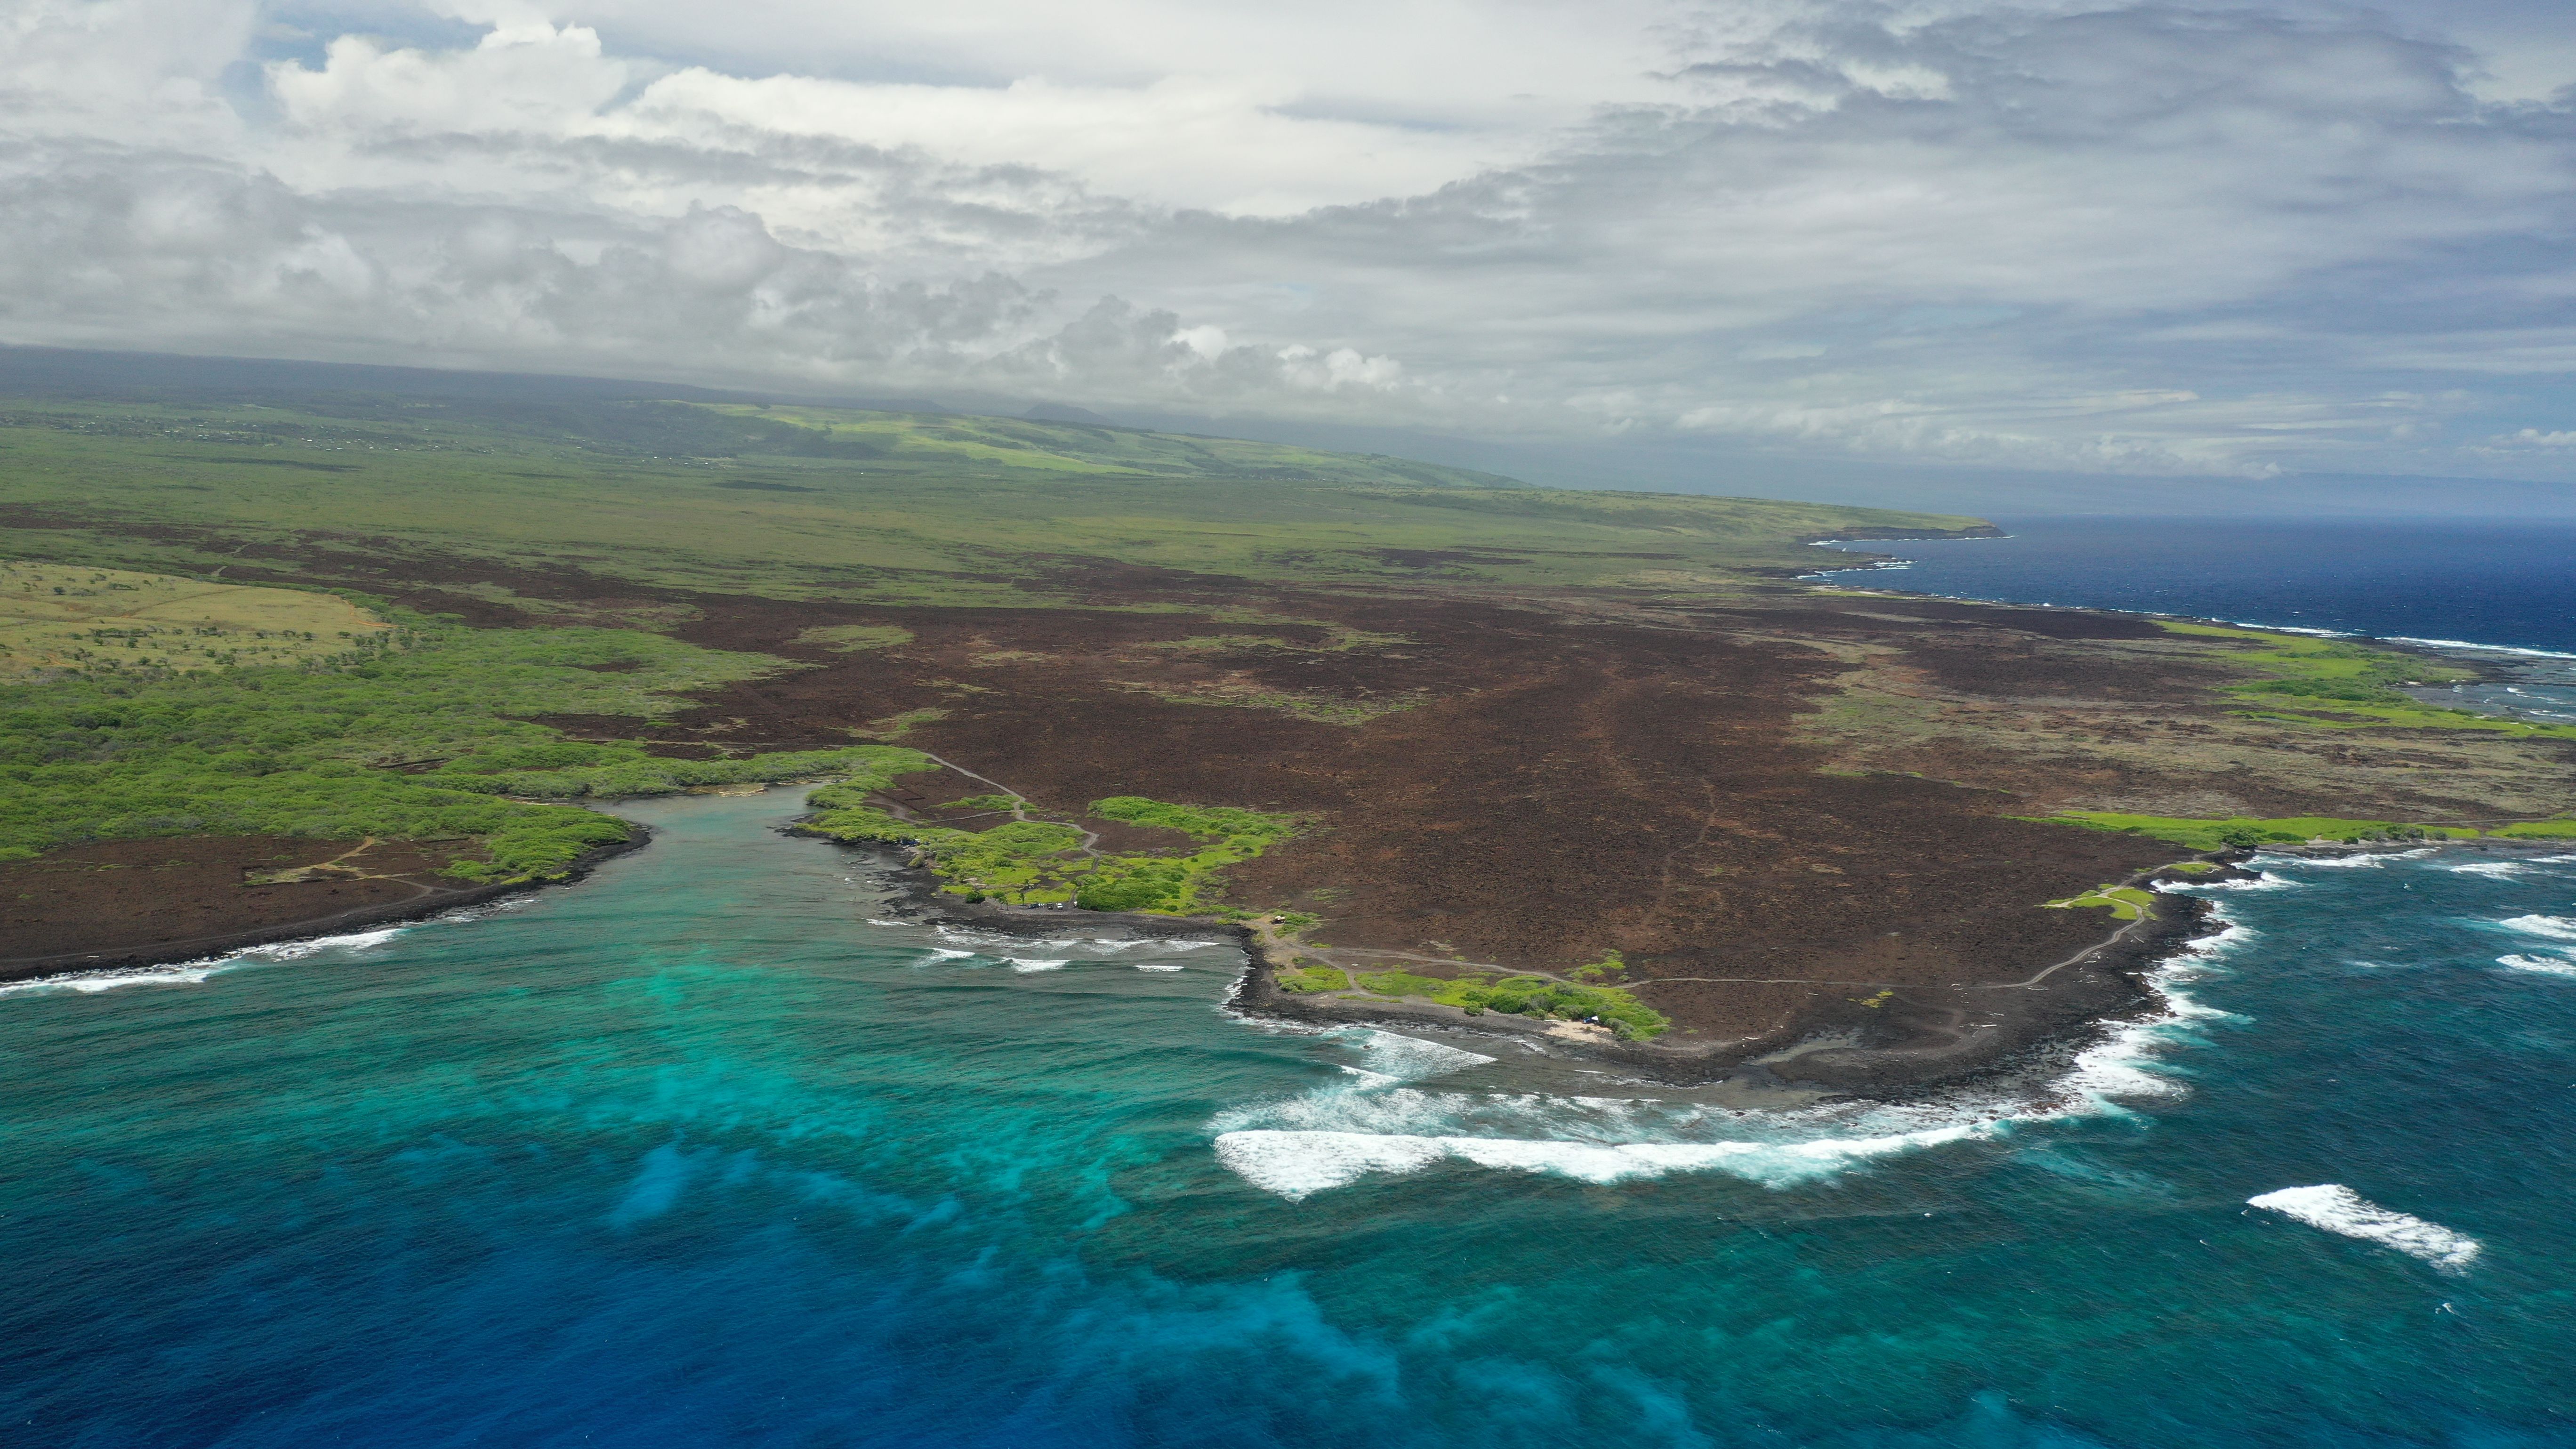 Kaʻū community's vision ensures 1,838 acres remain undeveloped
(Photo Credit: Shalan Crysdale, The Nature Conservancy)